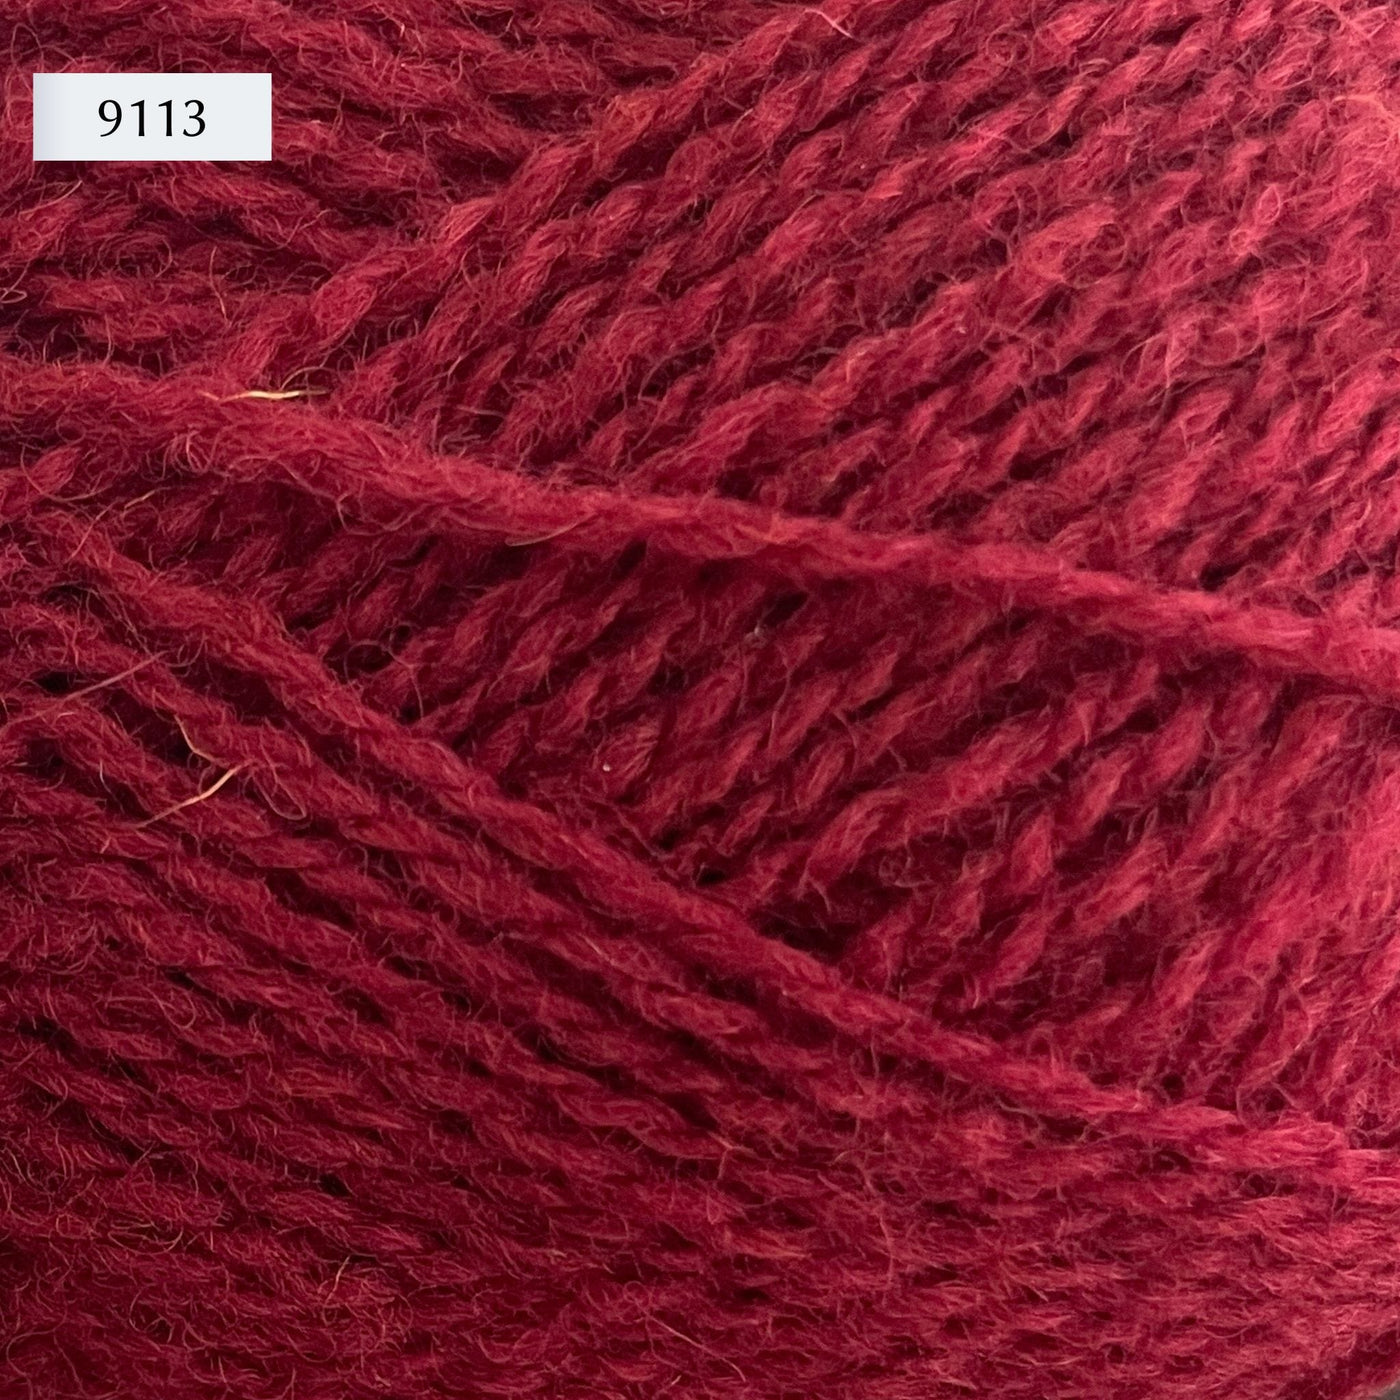 Jamieson & Smith 2ply Jumper Weight, light fingering weight yarn, in color 9113, medium red